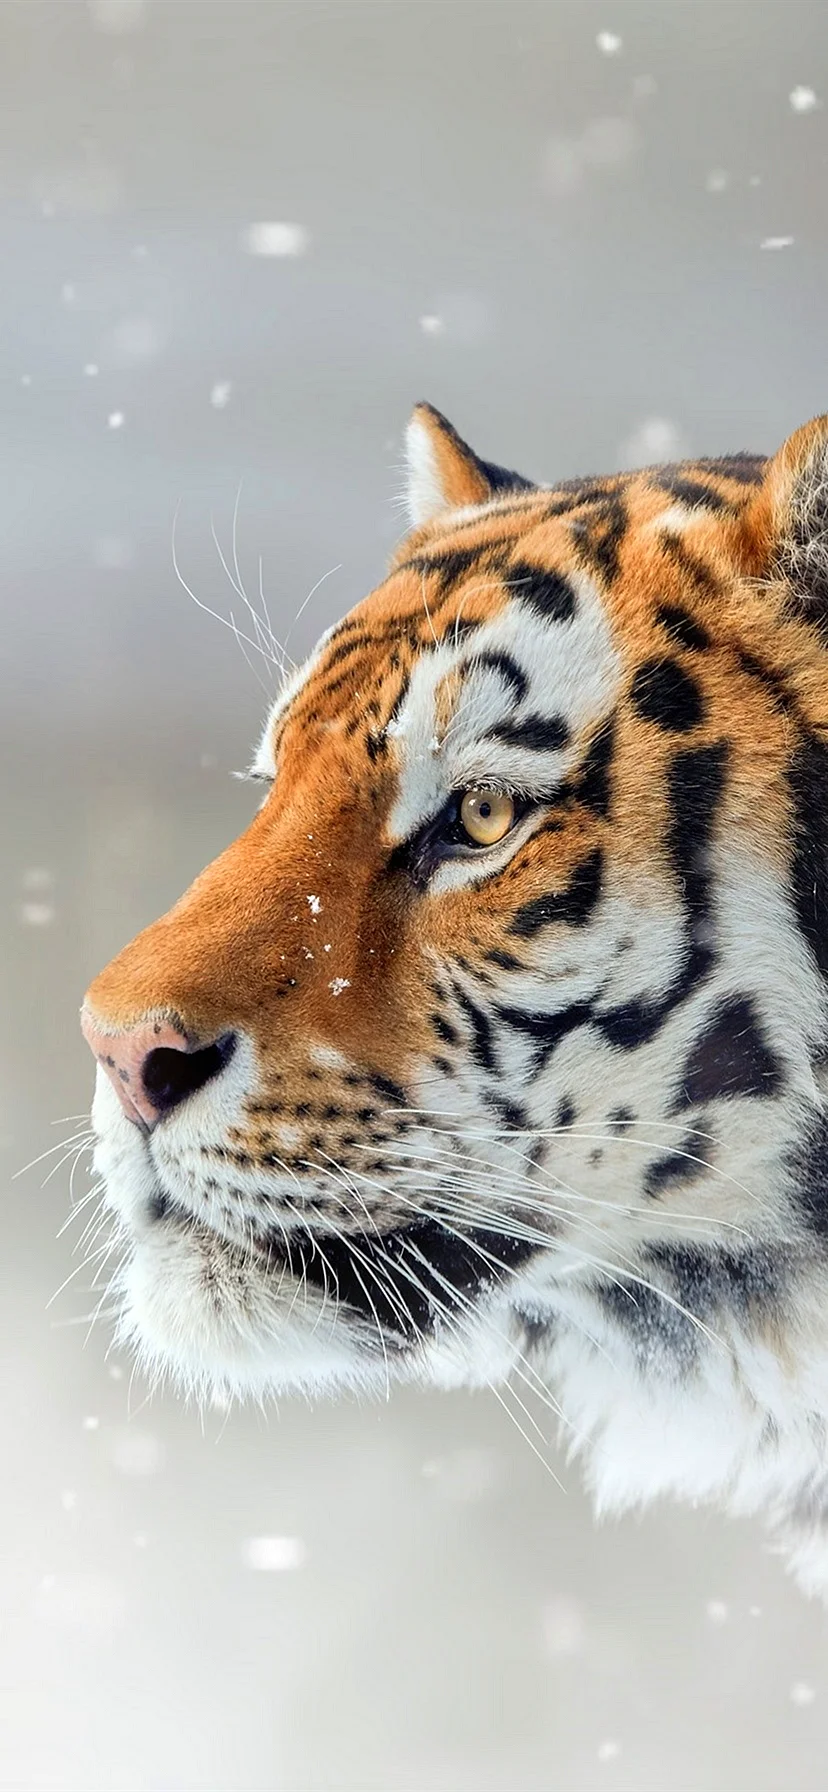 Tiger Full HD Wallpaper for iPhone 11